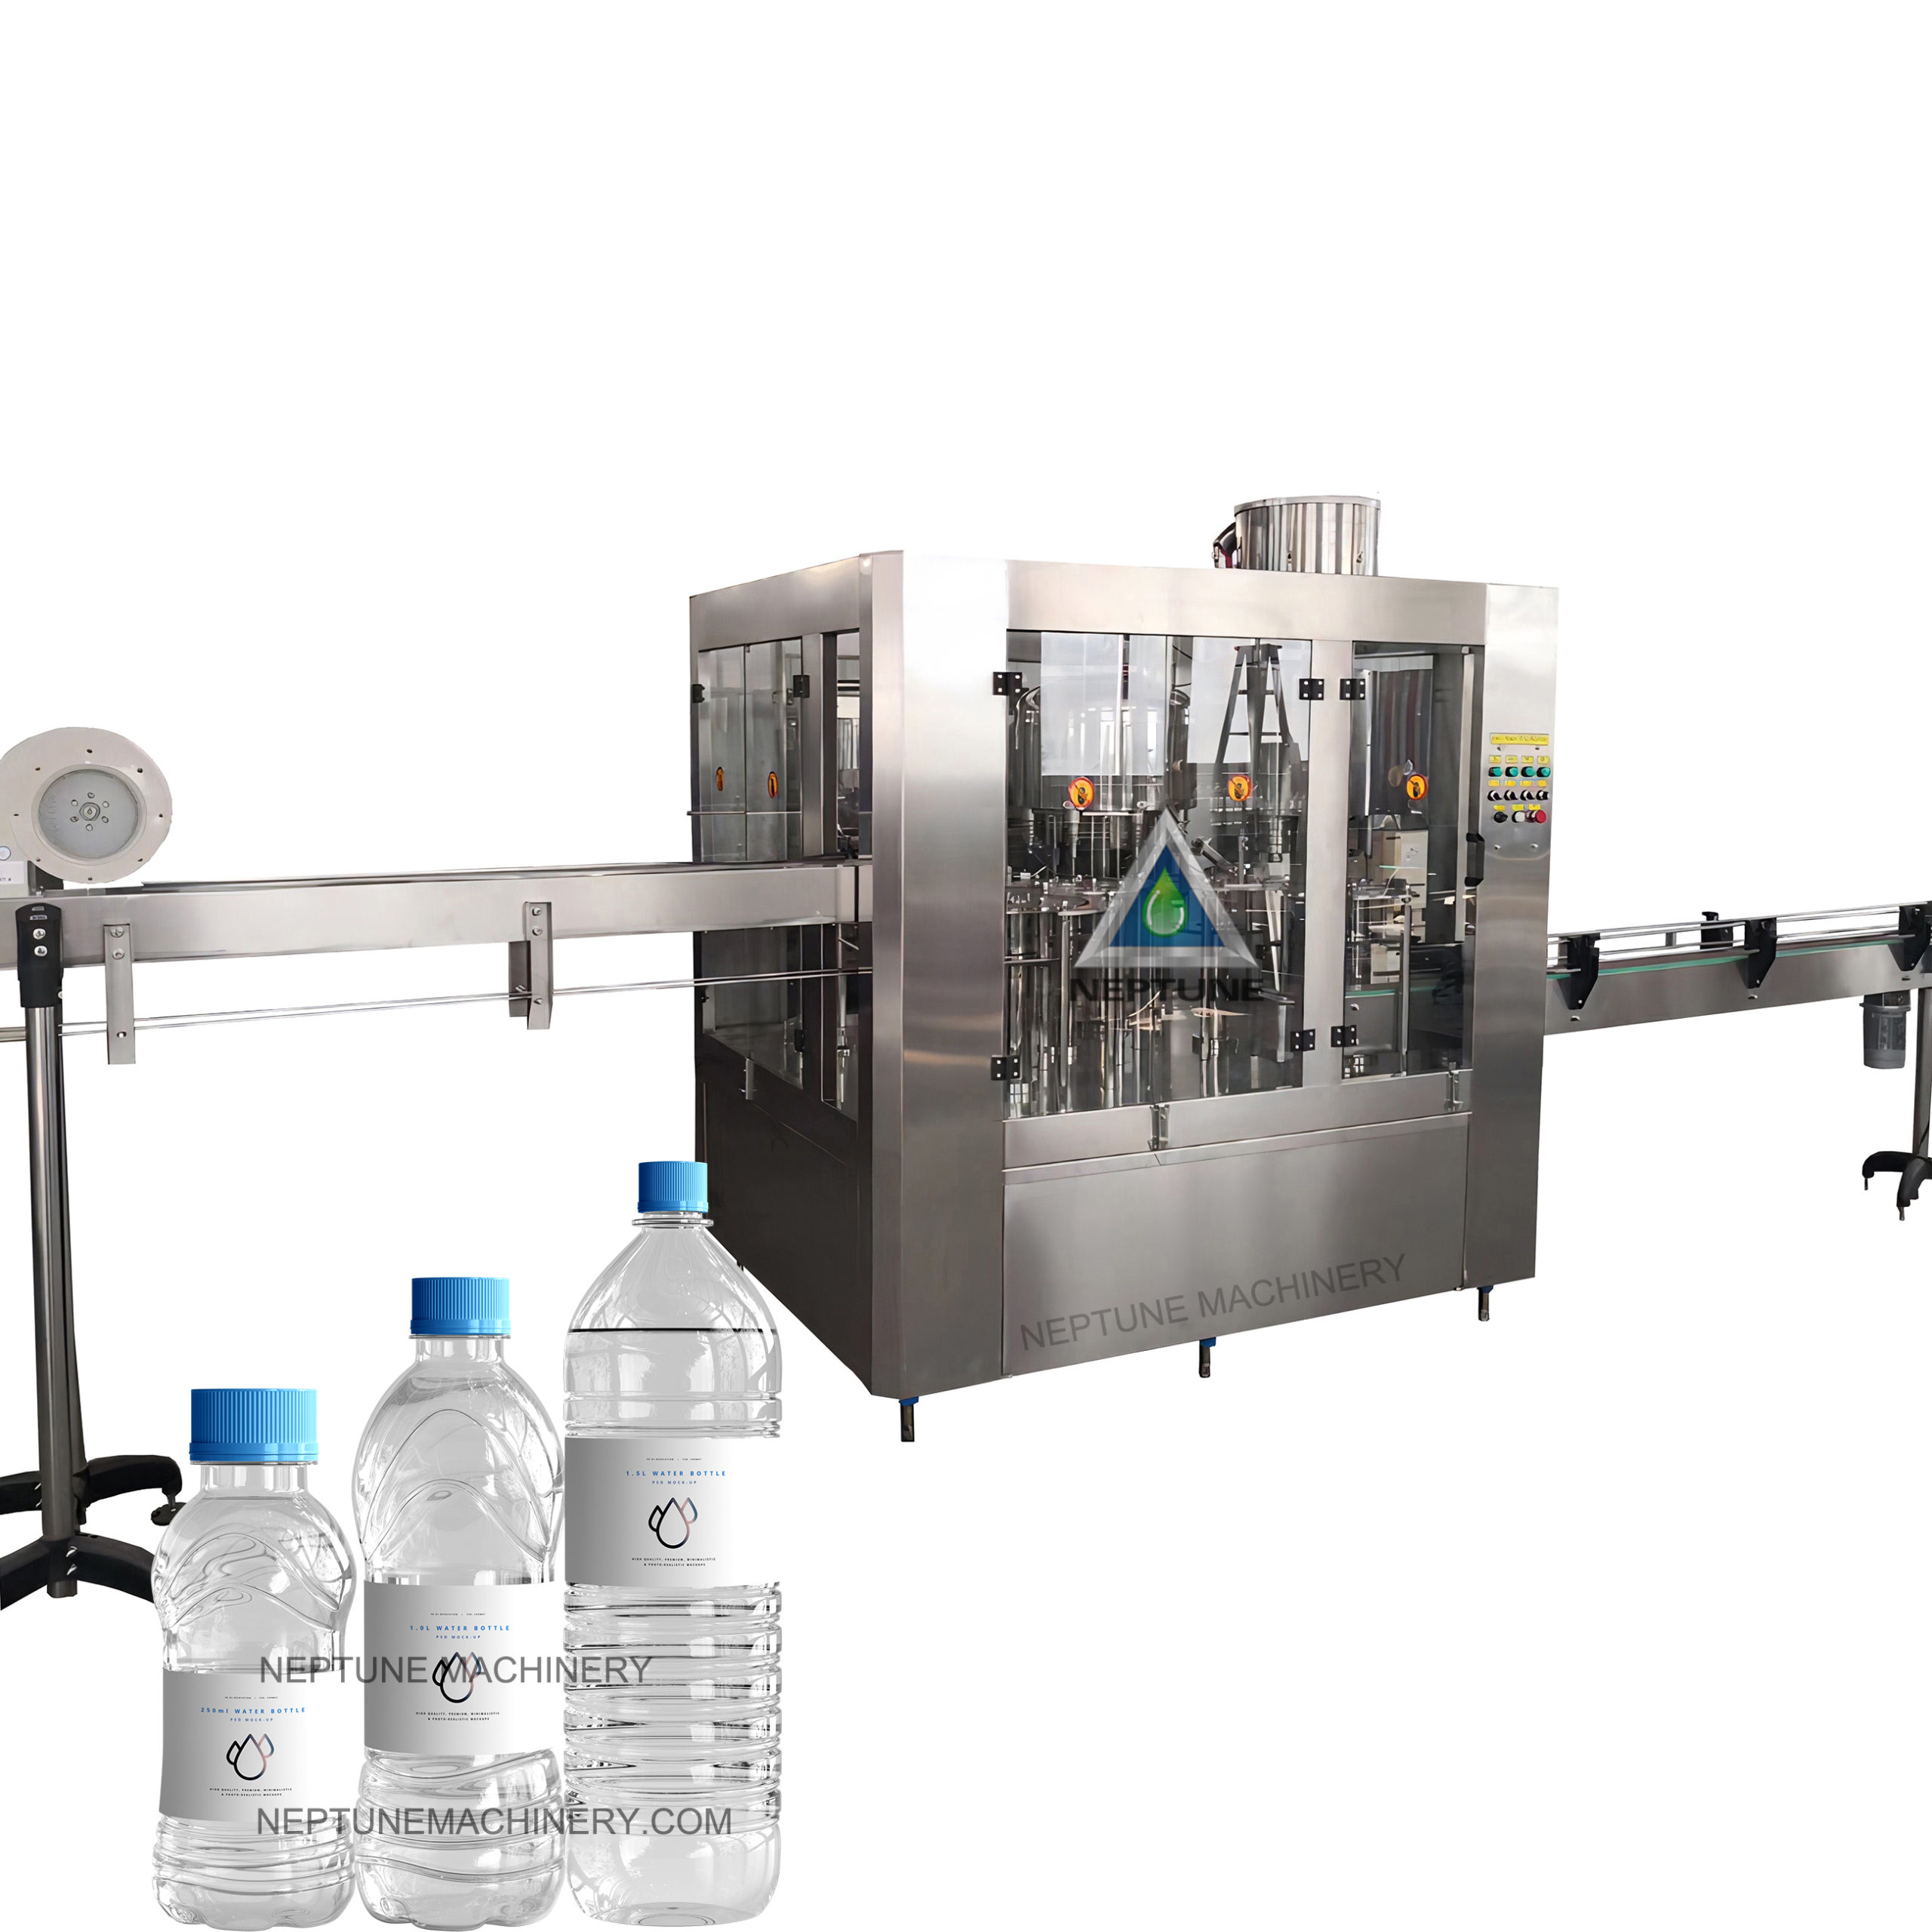 it is the water bottling machine for producetion small bottled water of an complete water bottling plant